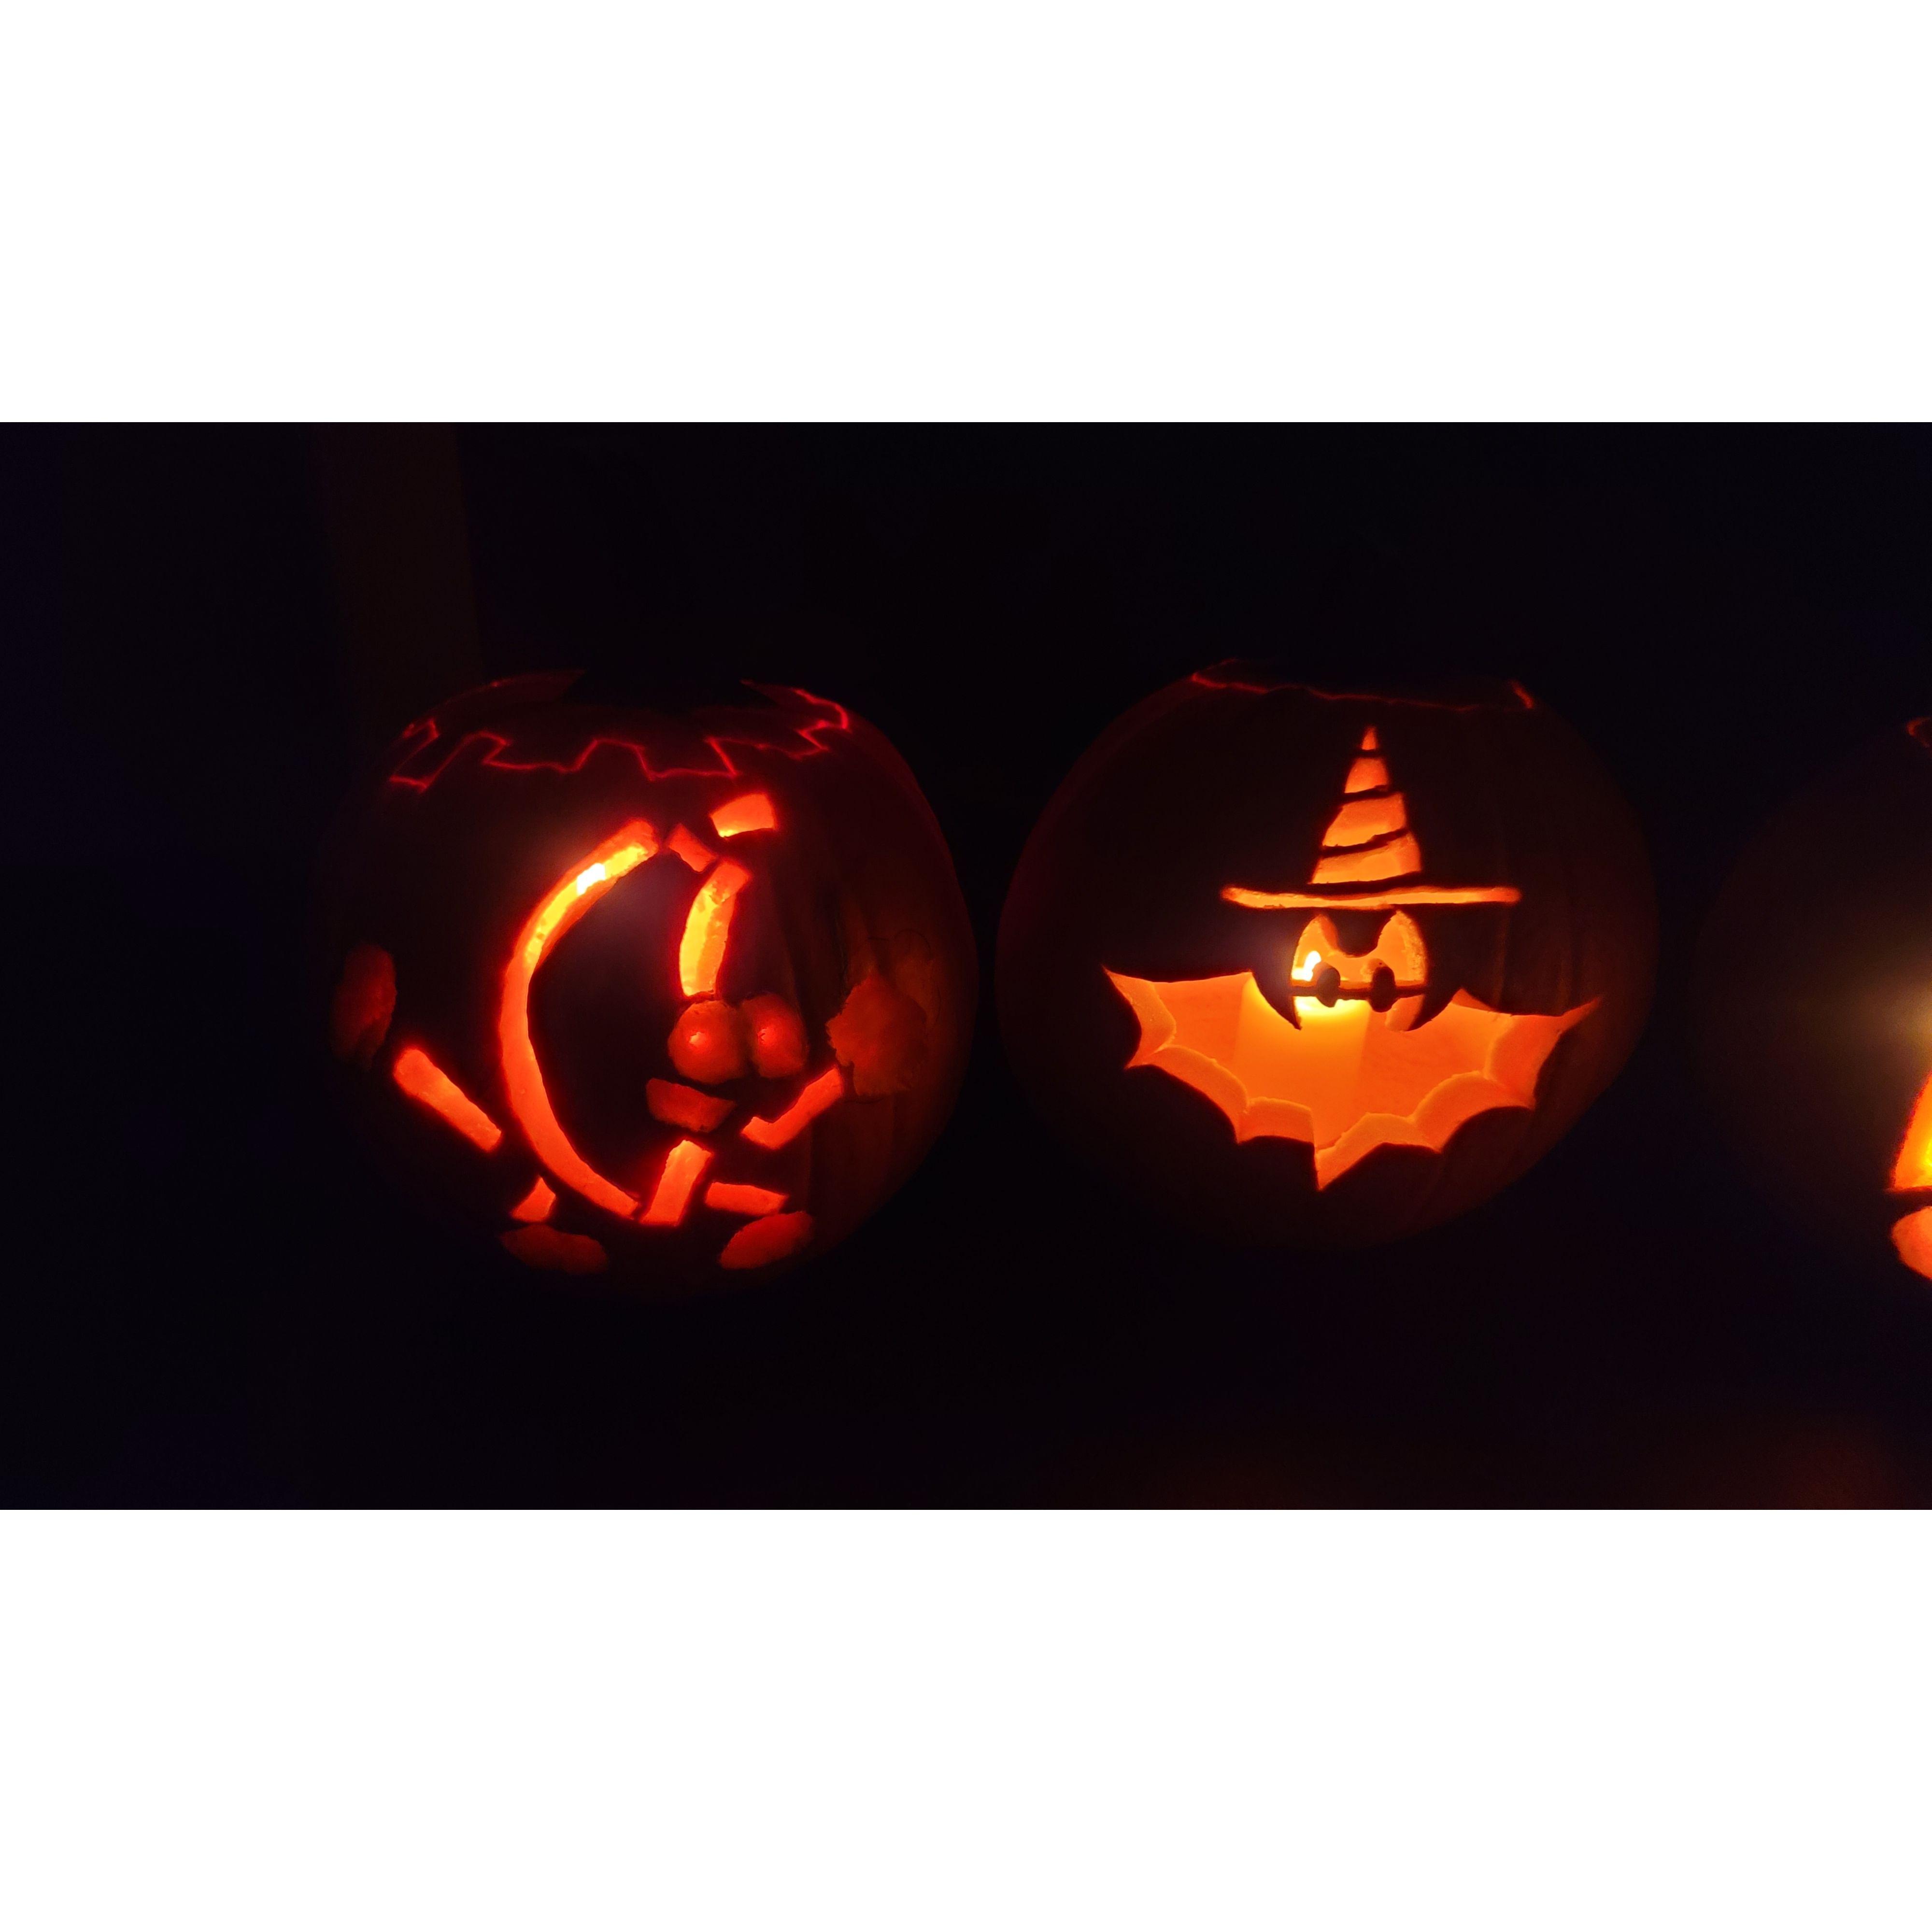 Who carved which pumpkin? Let us know what you think!